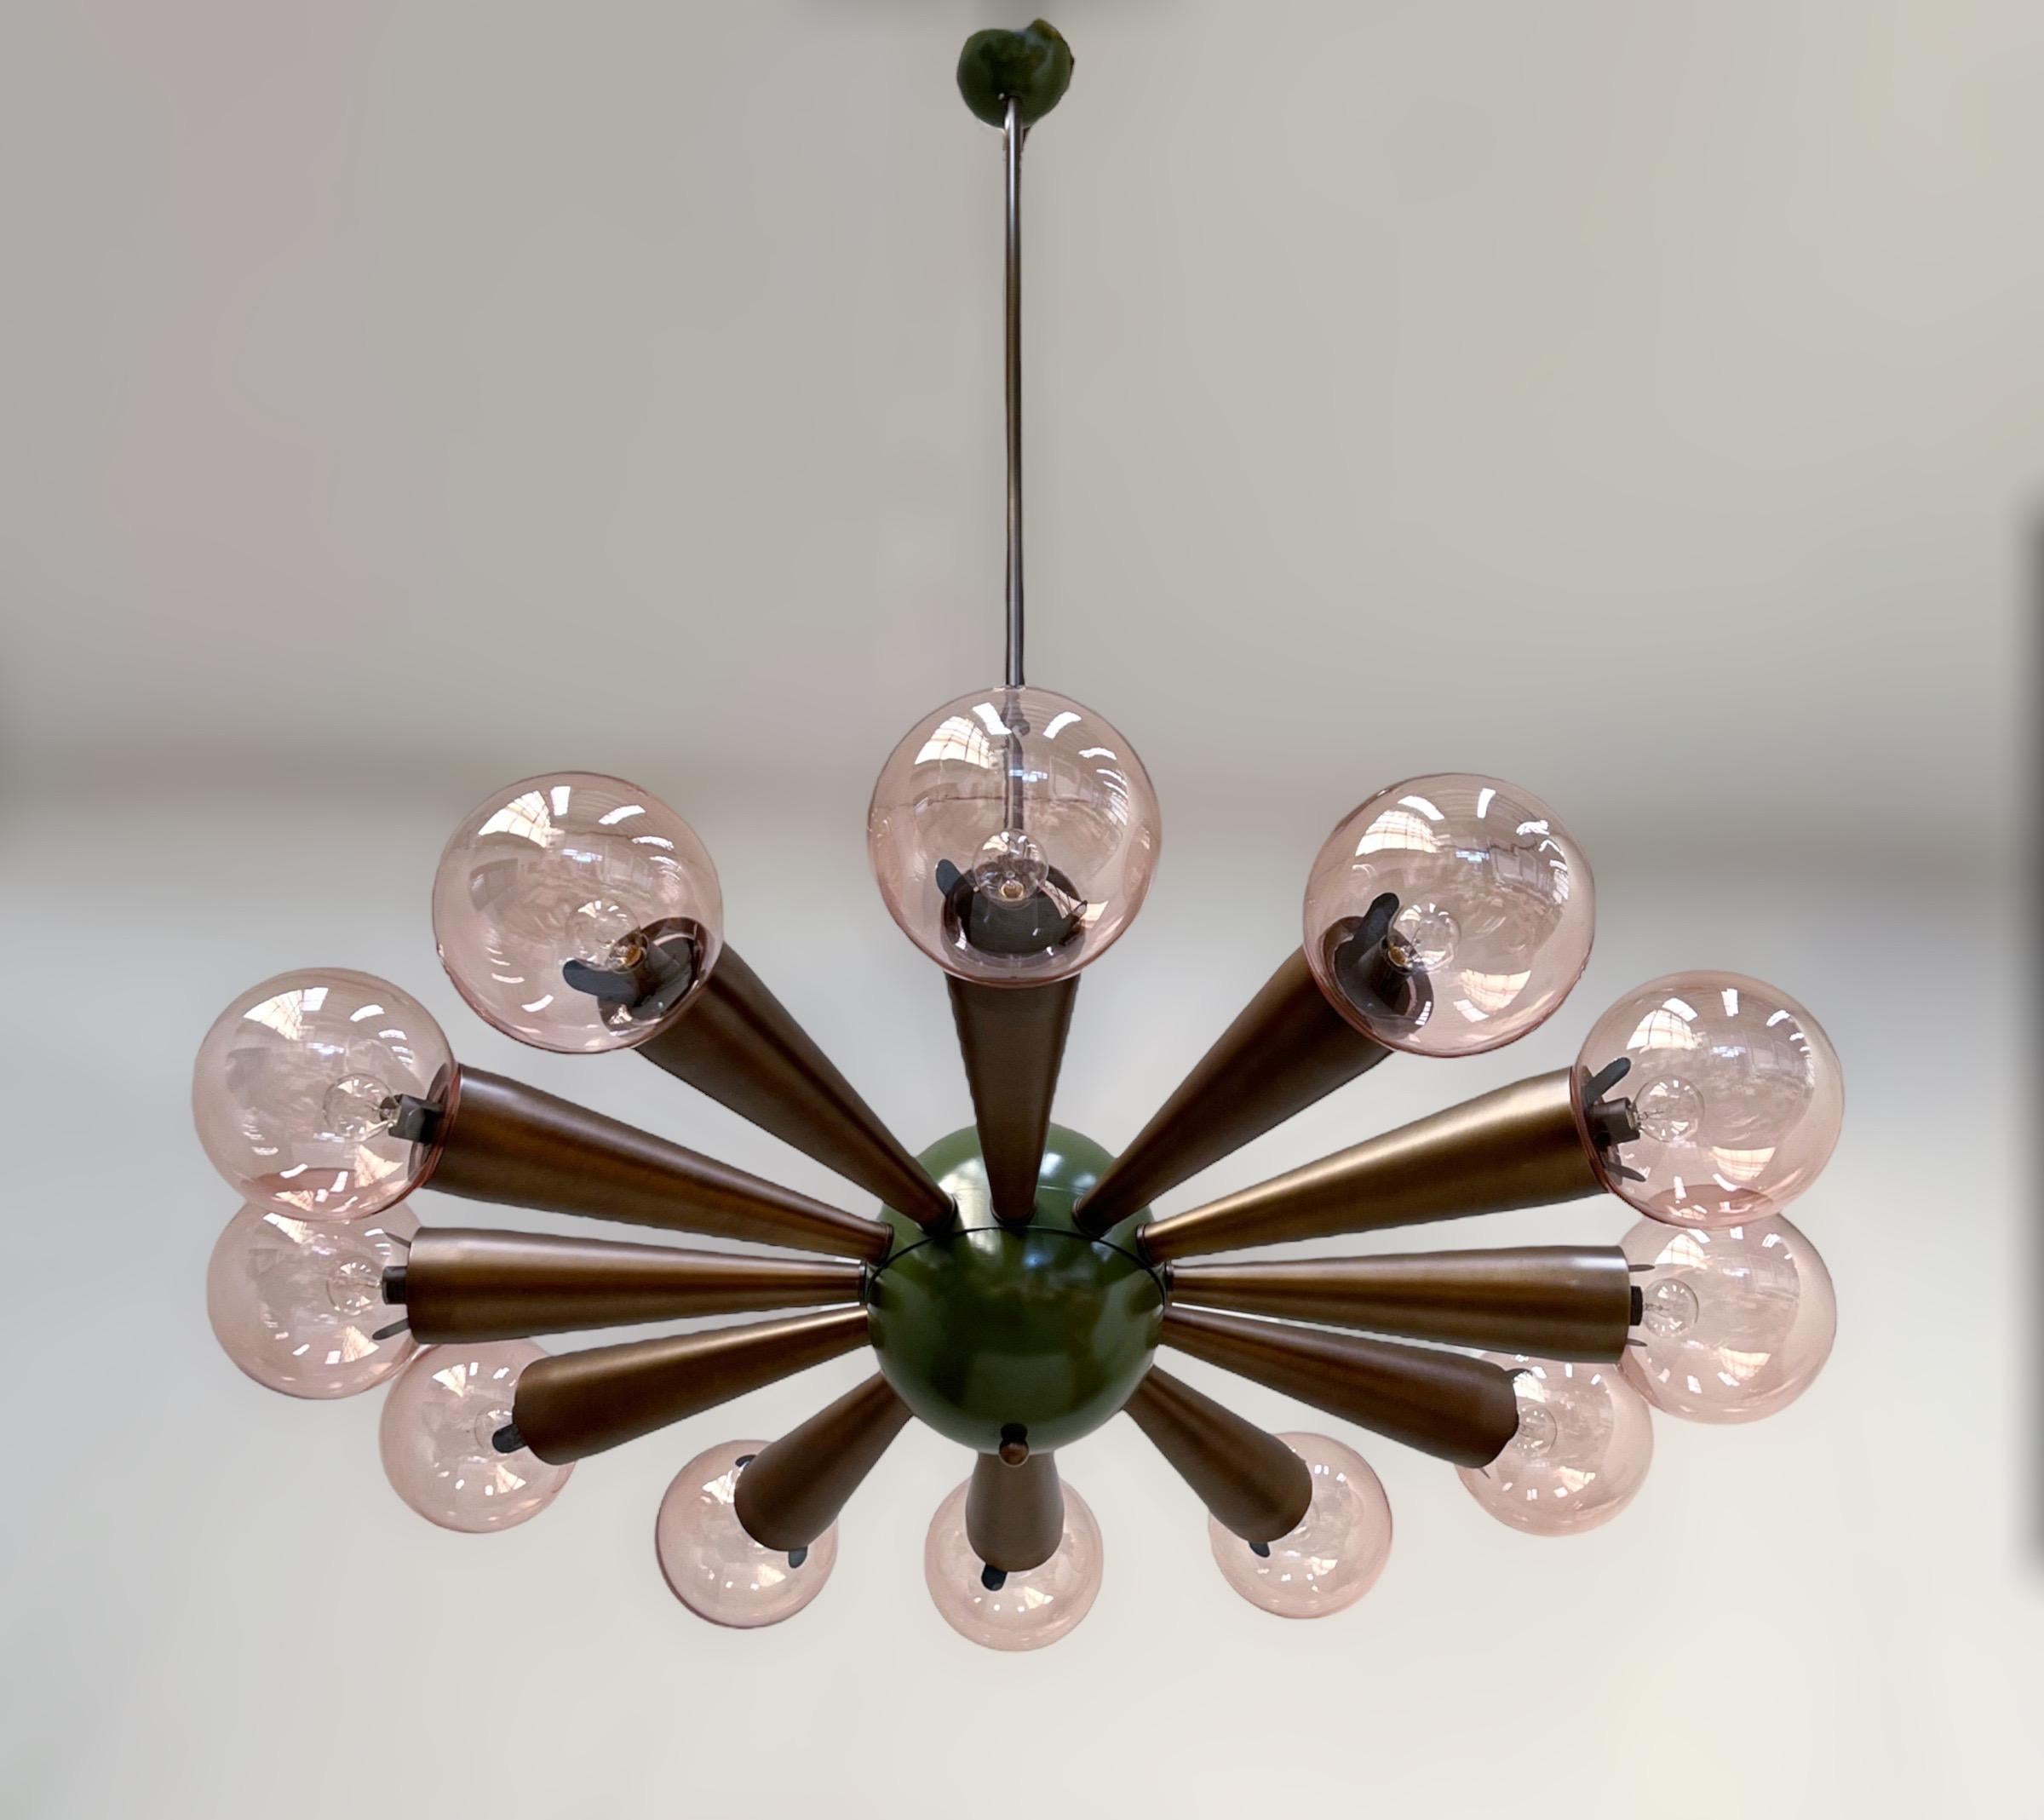 Italian chandelier with transparent pink coral colored Murano glass orbs, mounted on bronzed frame / Designed by Fabio Bergomi for Fabio Ltd / Made in Italy
12 lights / E12 or E14 type / max 40W each
Measures: Diameter 43 inches / Height 66 inches